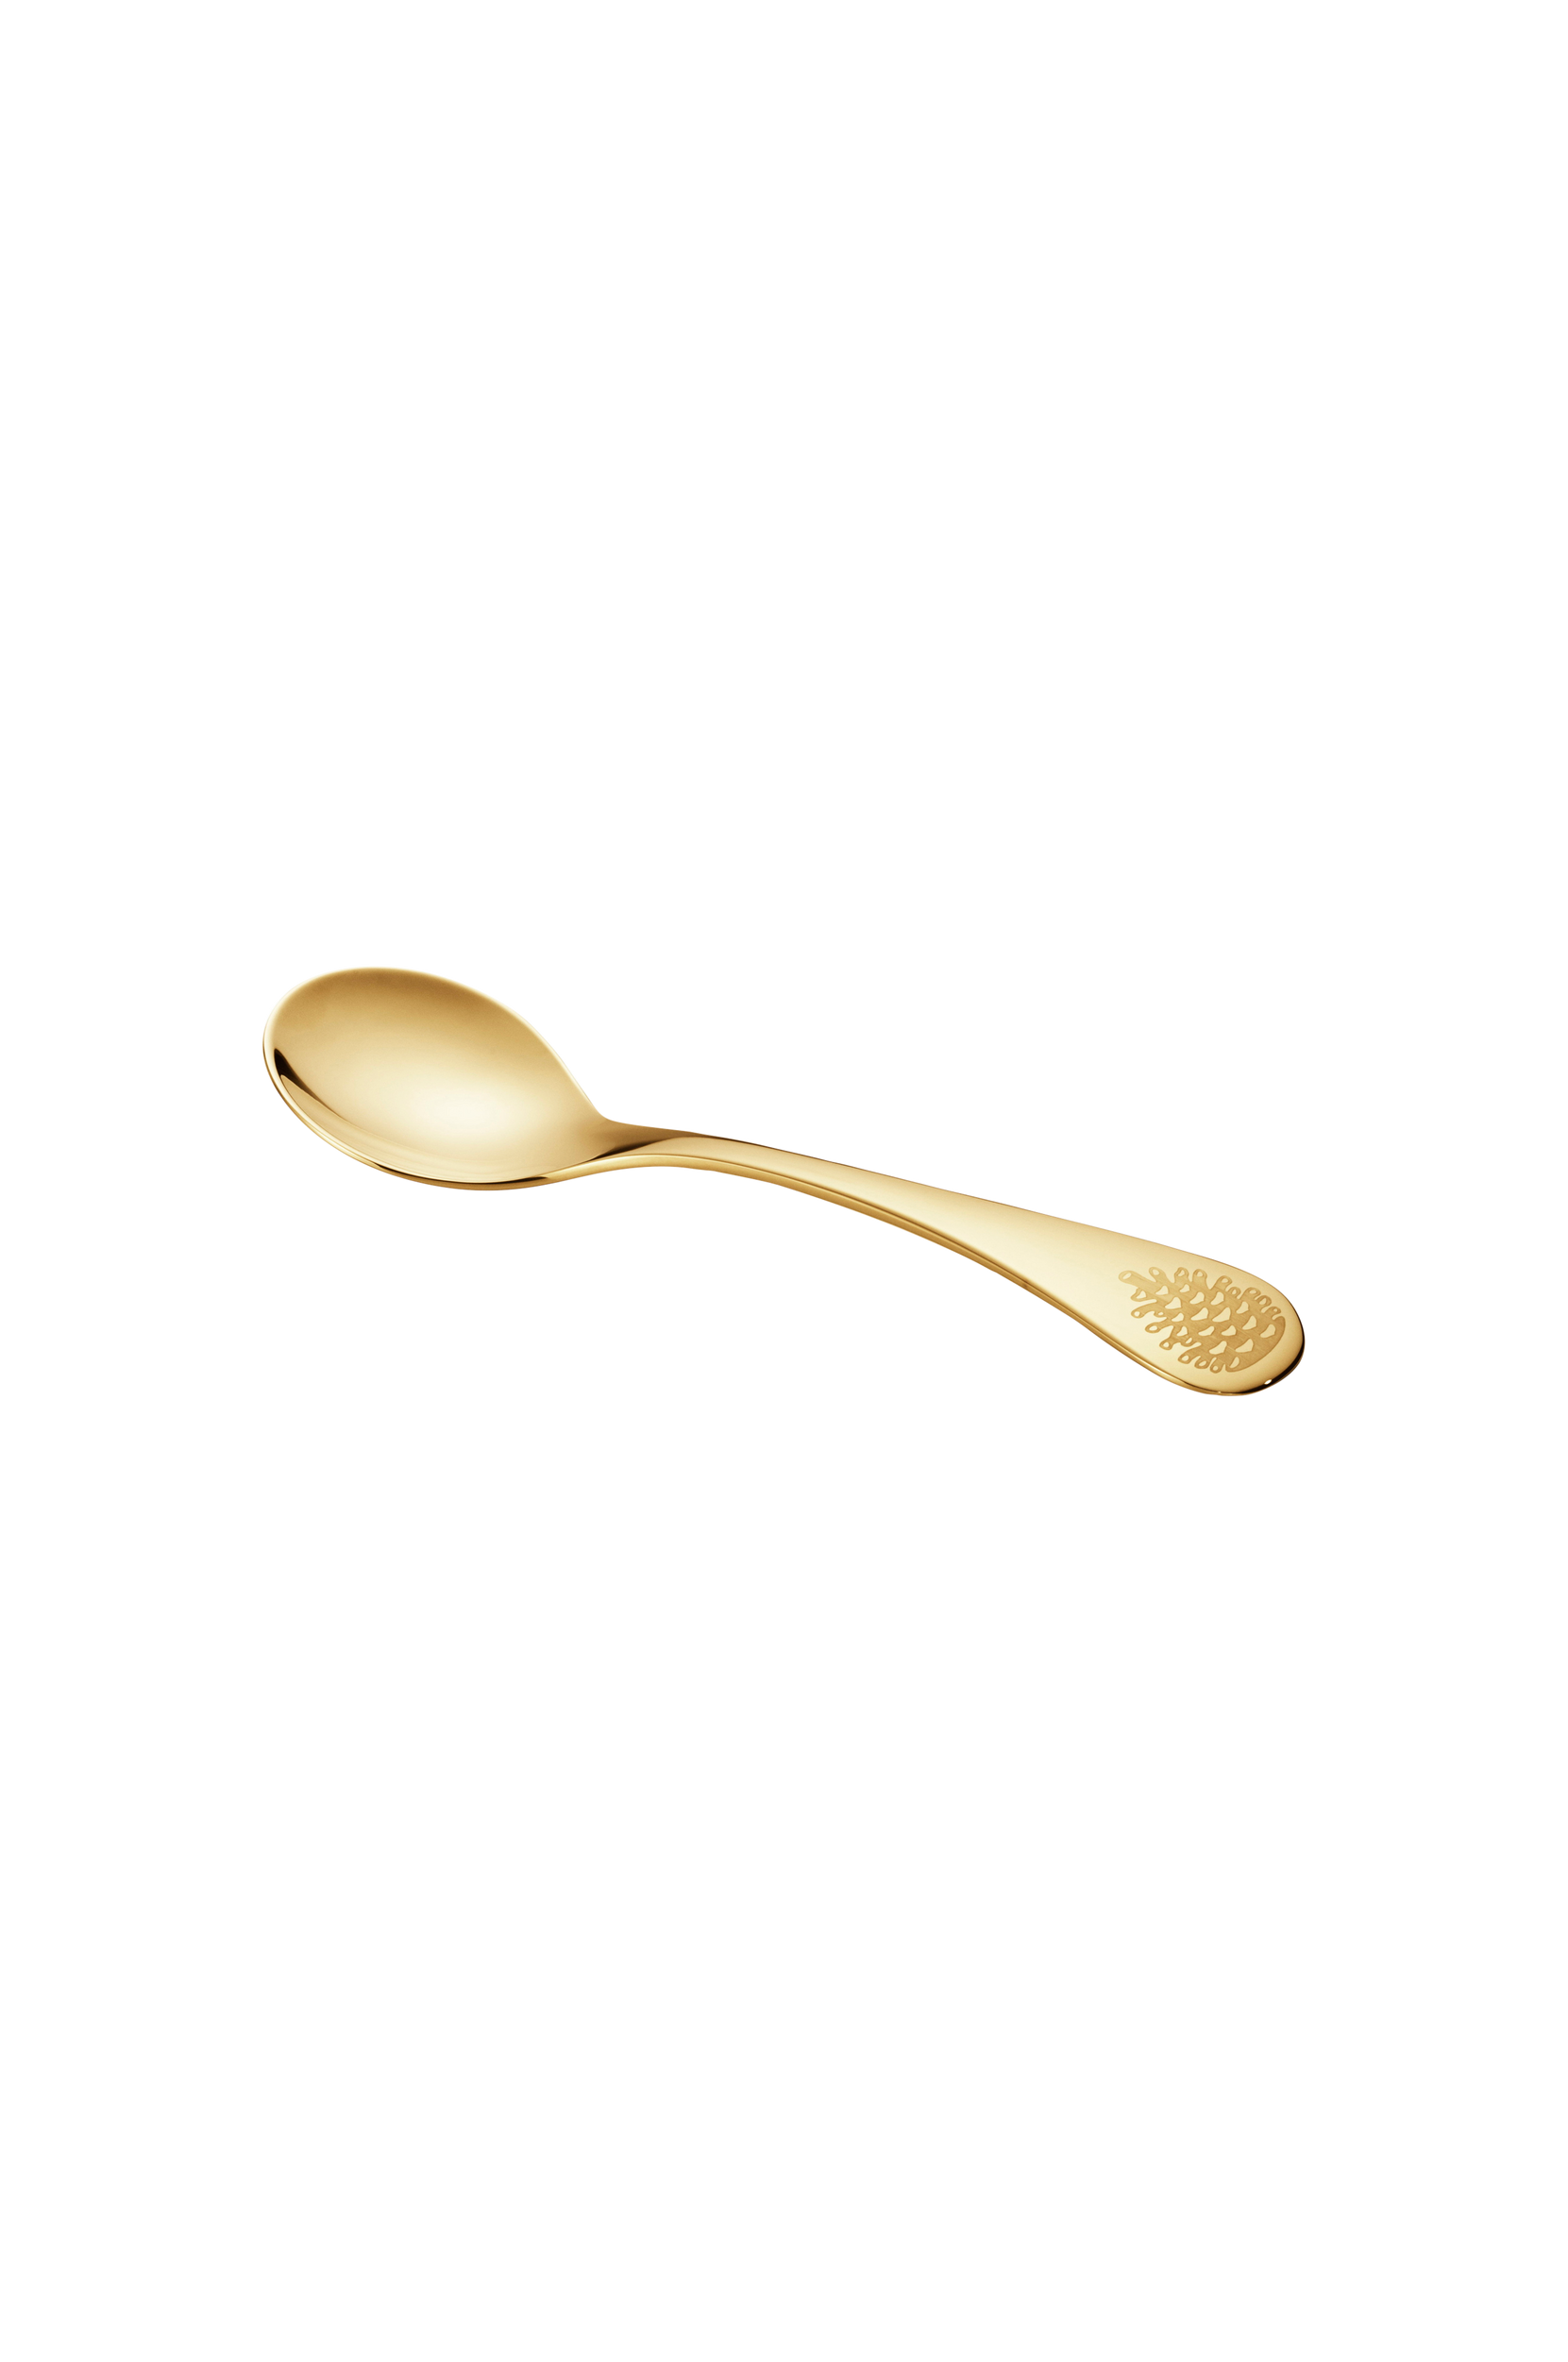 Georg Jensen - Julsked Christmas Spoon Stainless Steel Gold Plated längd 152 mm - Guld